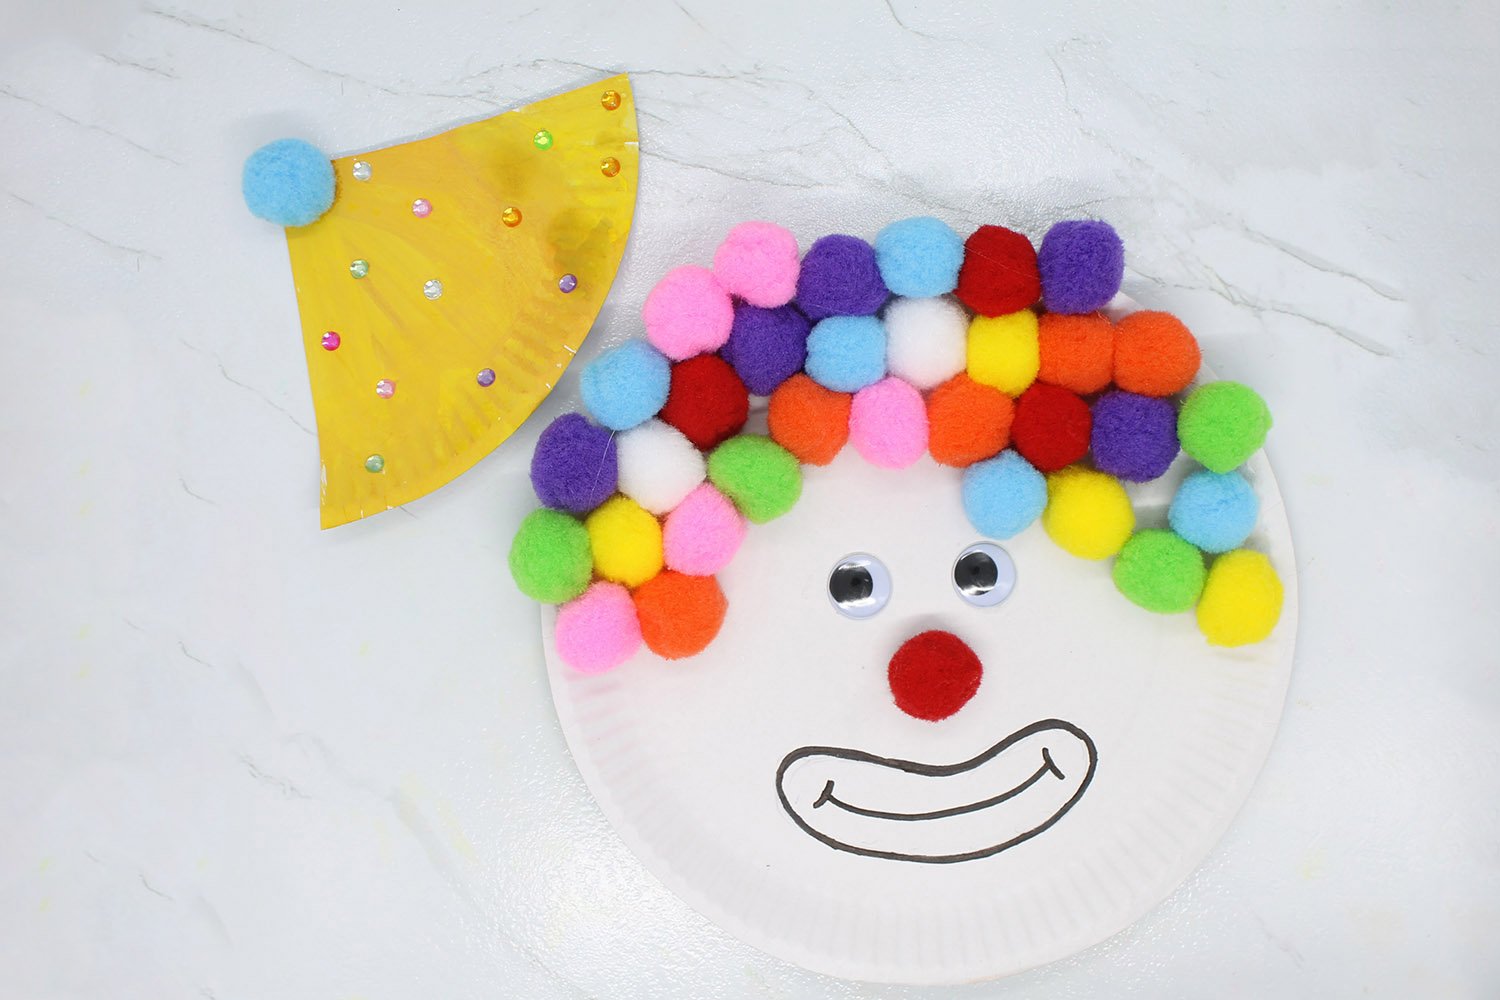 How To Make a Paper Plate Clown - Step 012